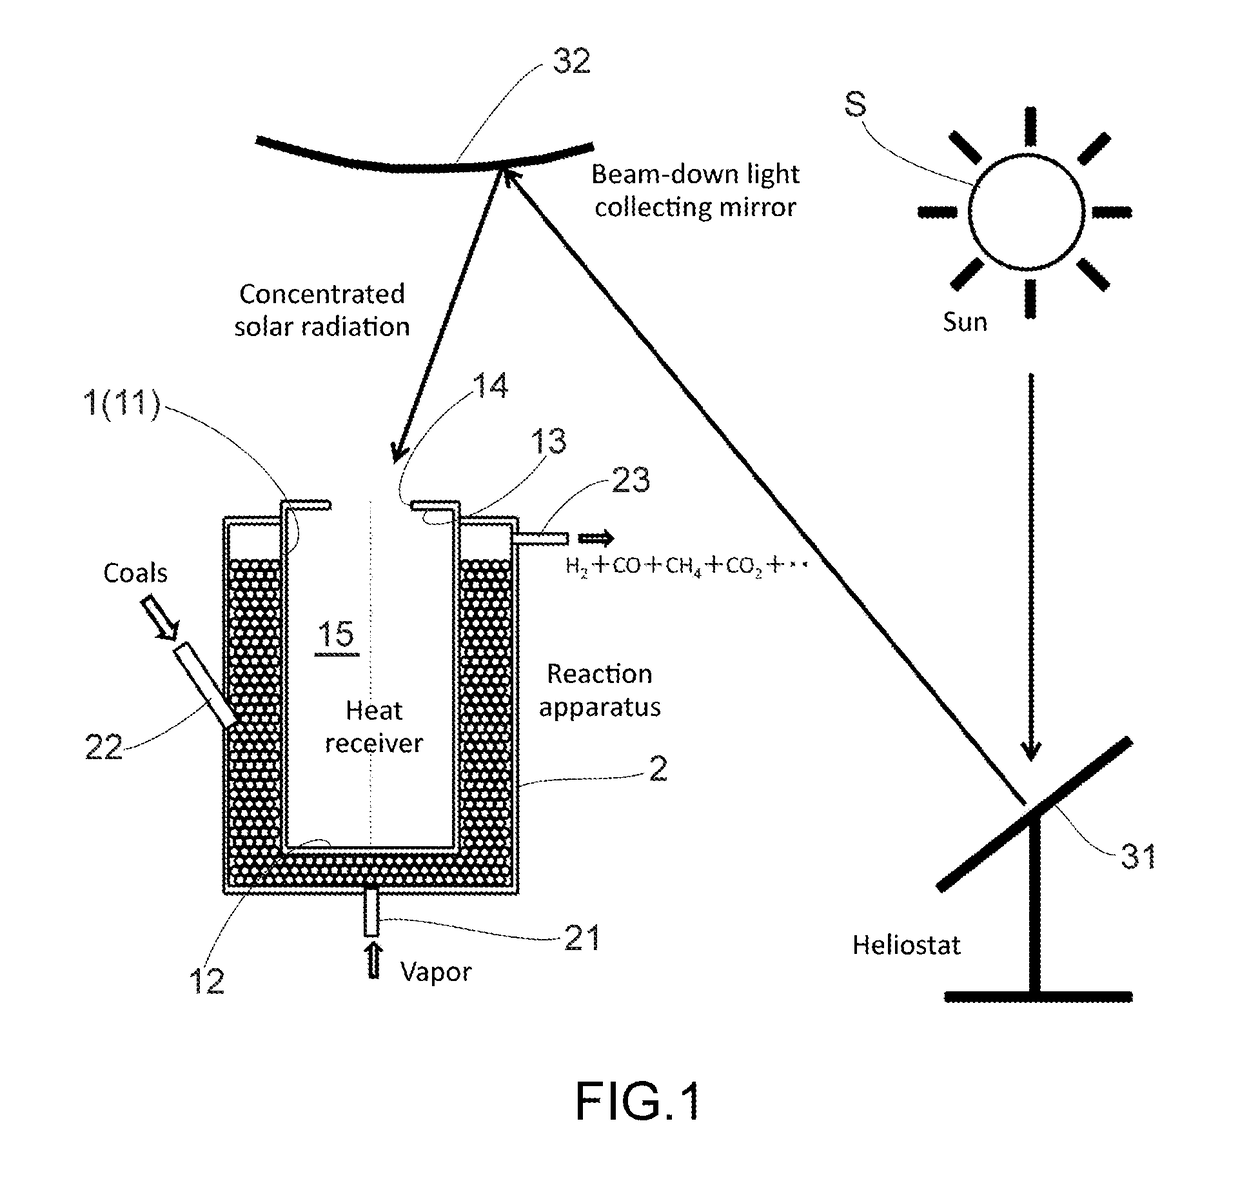 Concentrated solar heat receiver, reactor, and heater